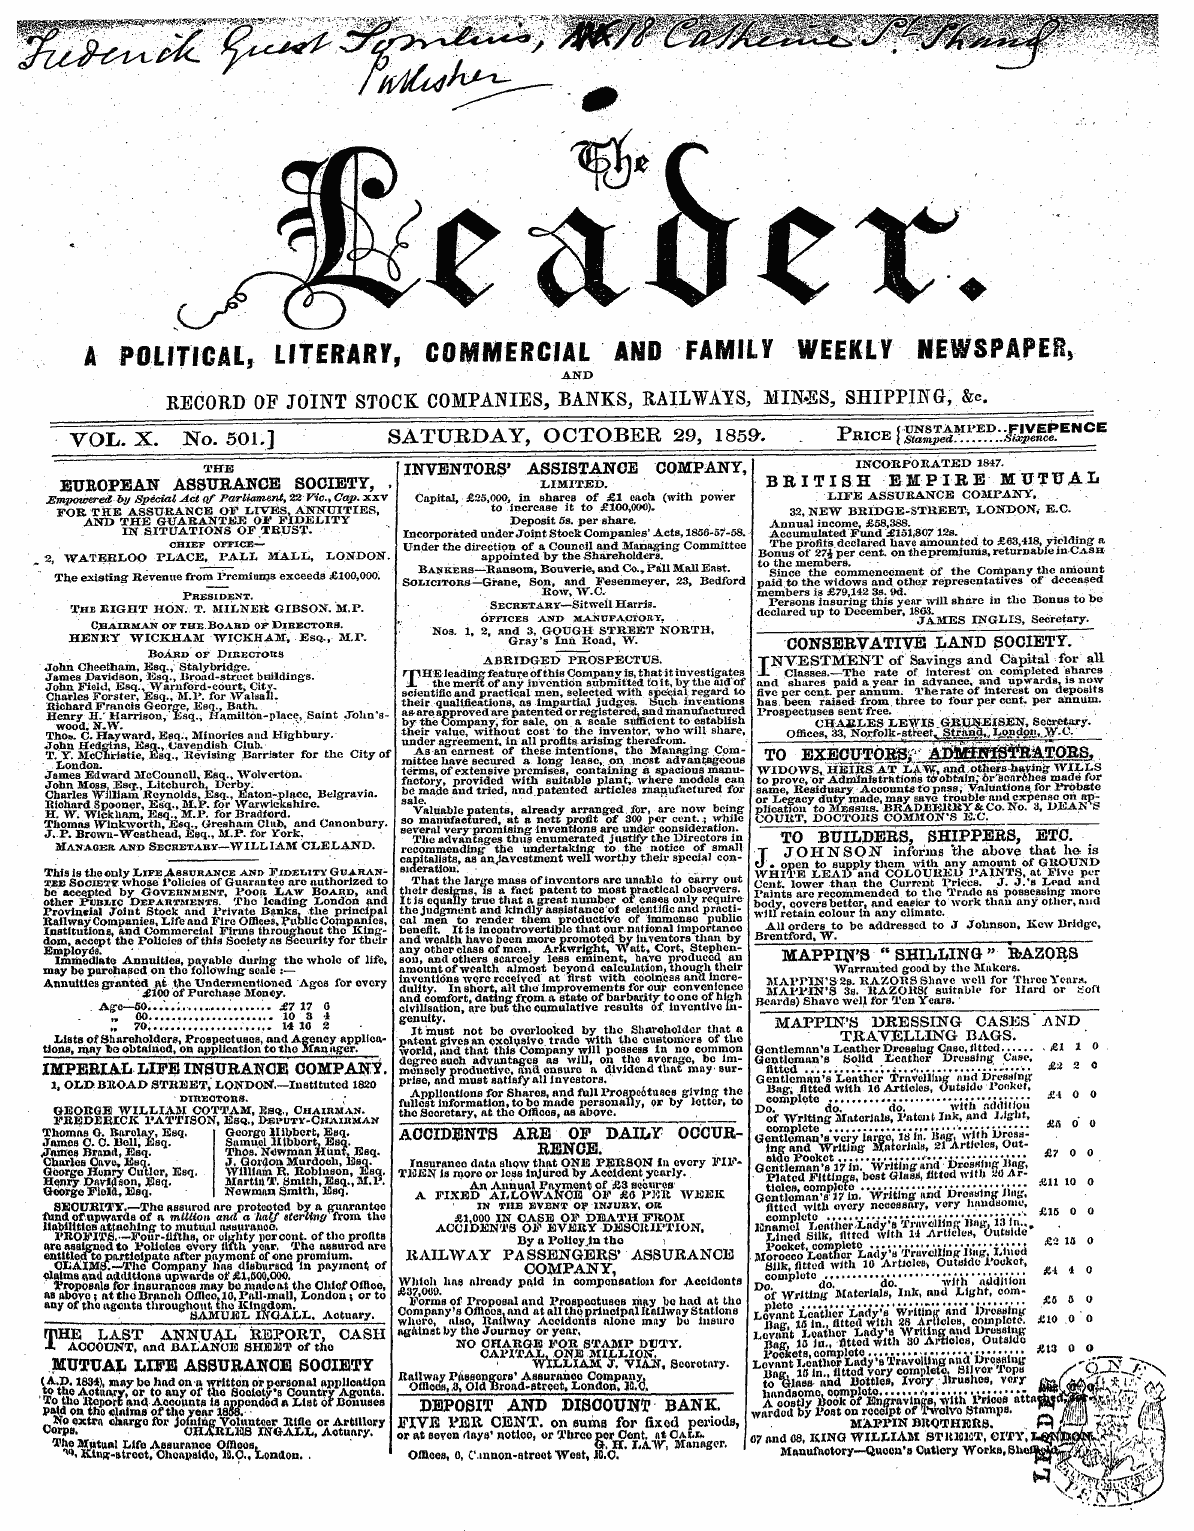 Leader (1850-1860): jS F Y, 2nd edition - Ad00110